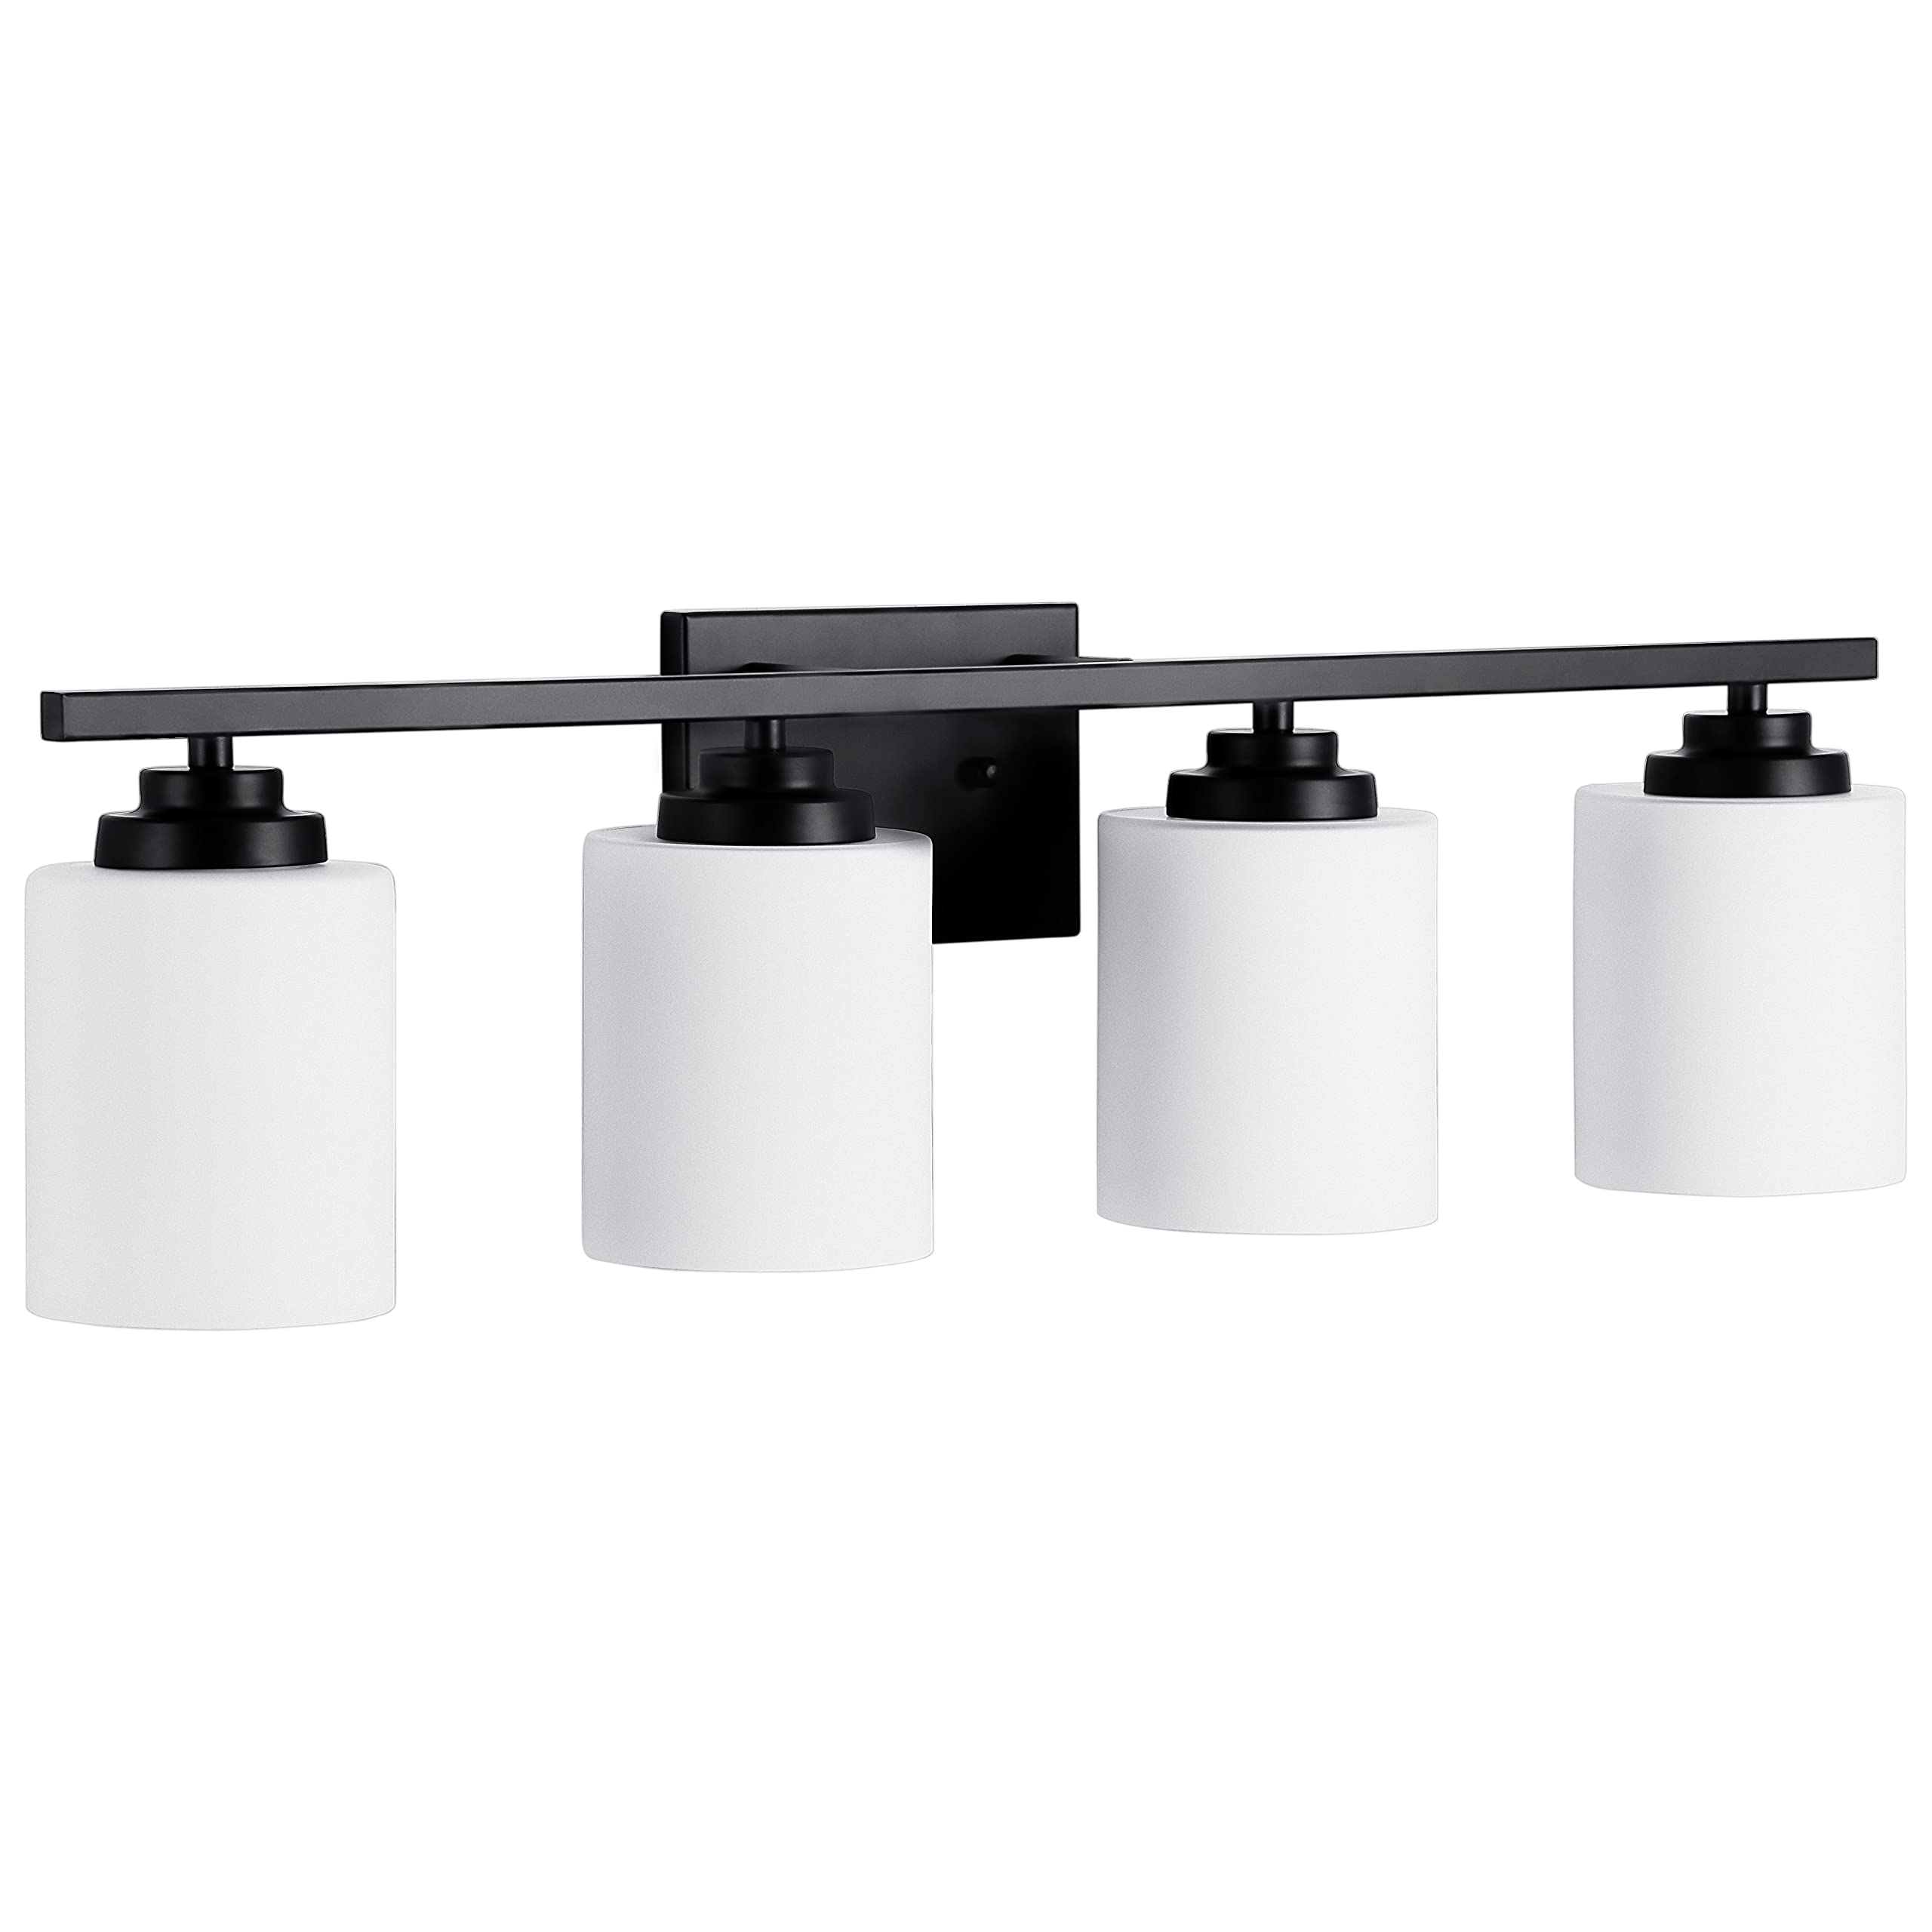 NEOUS Matte Black Vanity Lights for Bathroom, 4 Light Vanity Light Fixture, Modern Bathroom Vanity Lights with Cylinder Glass Shade 4-Lamp